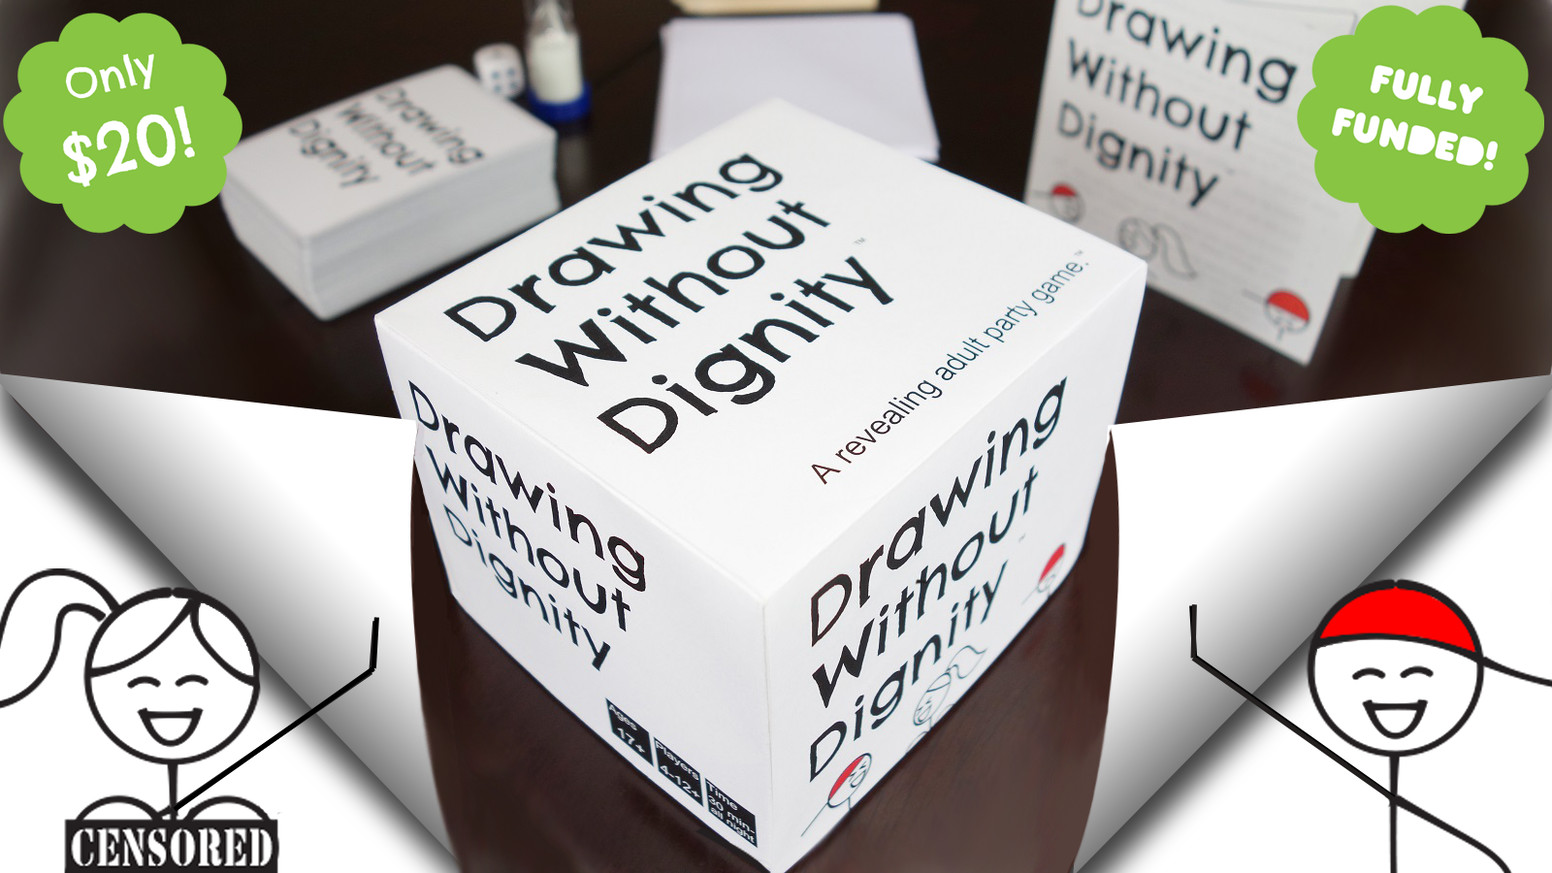 Art Games For Adults
 Drawing Without Dignity An Adult Party Game by TwoPointOh